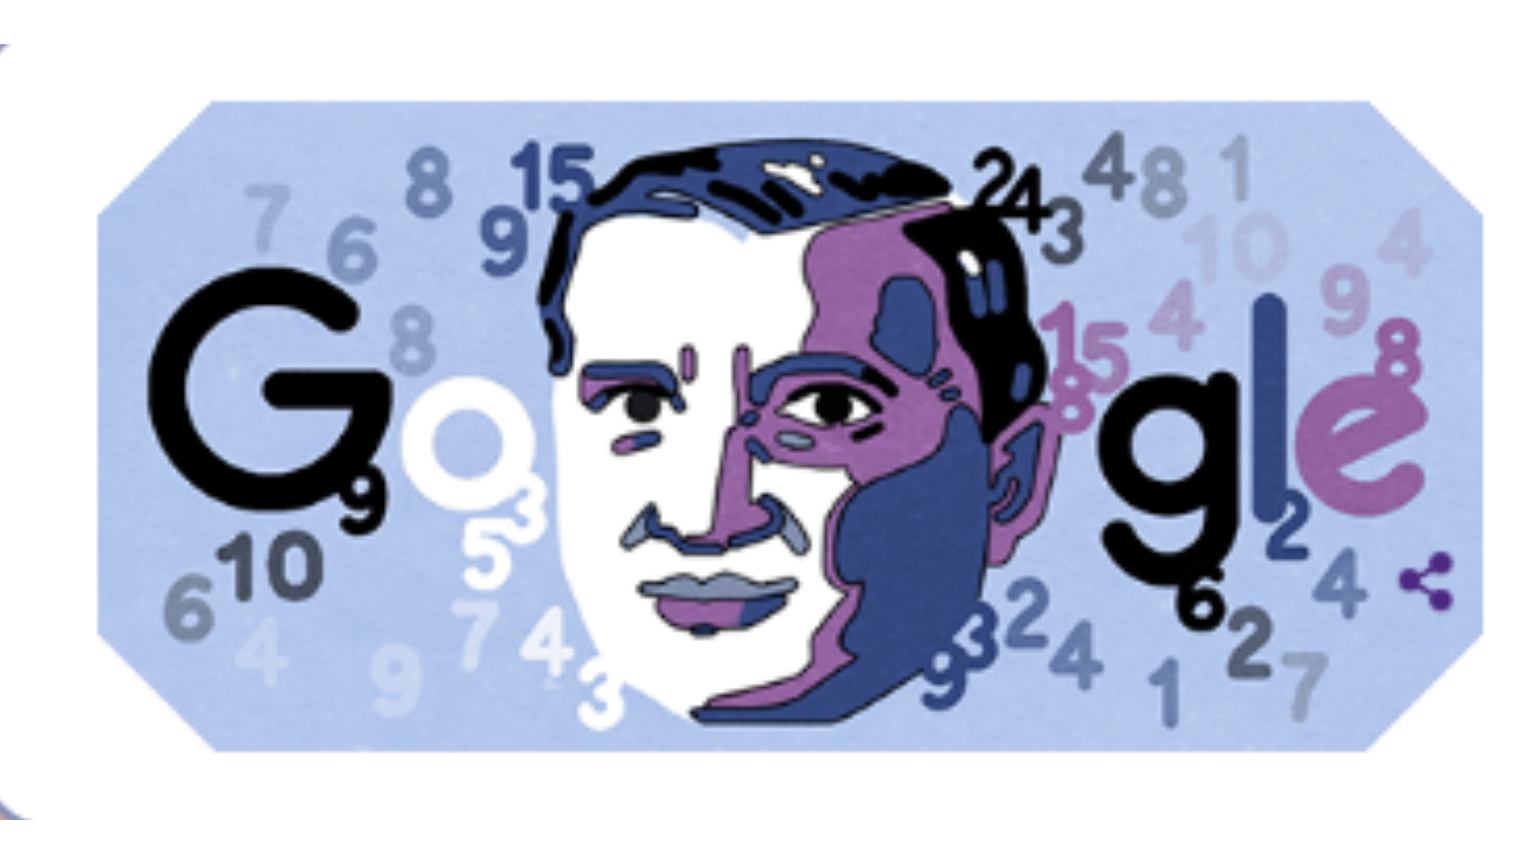 Stefan Banach on Google Doodle.  One of the greatest mathematicians of the twentieth century